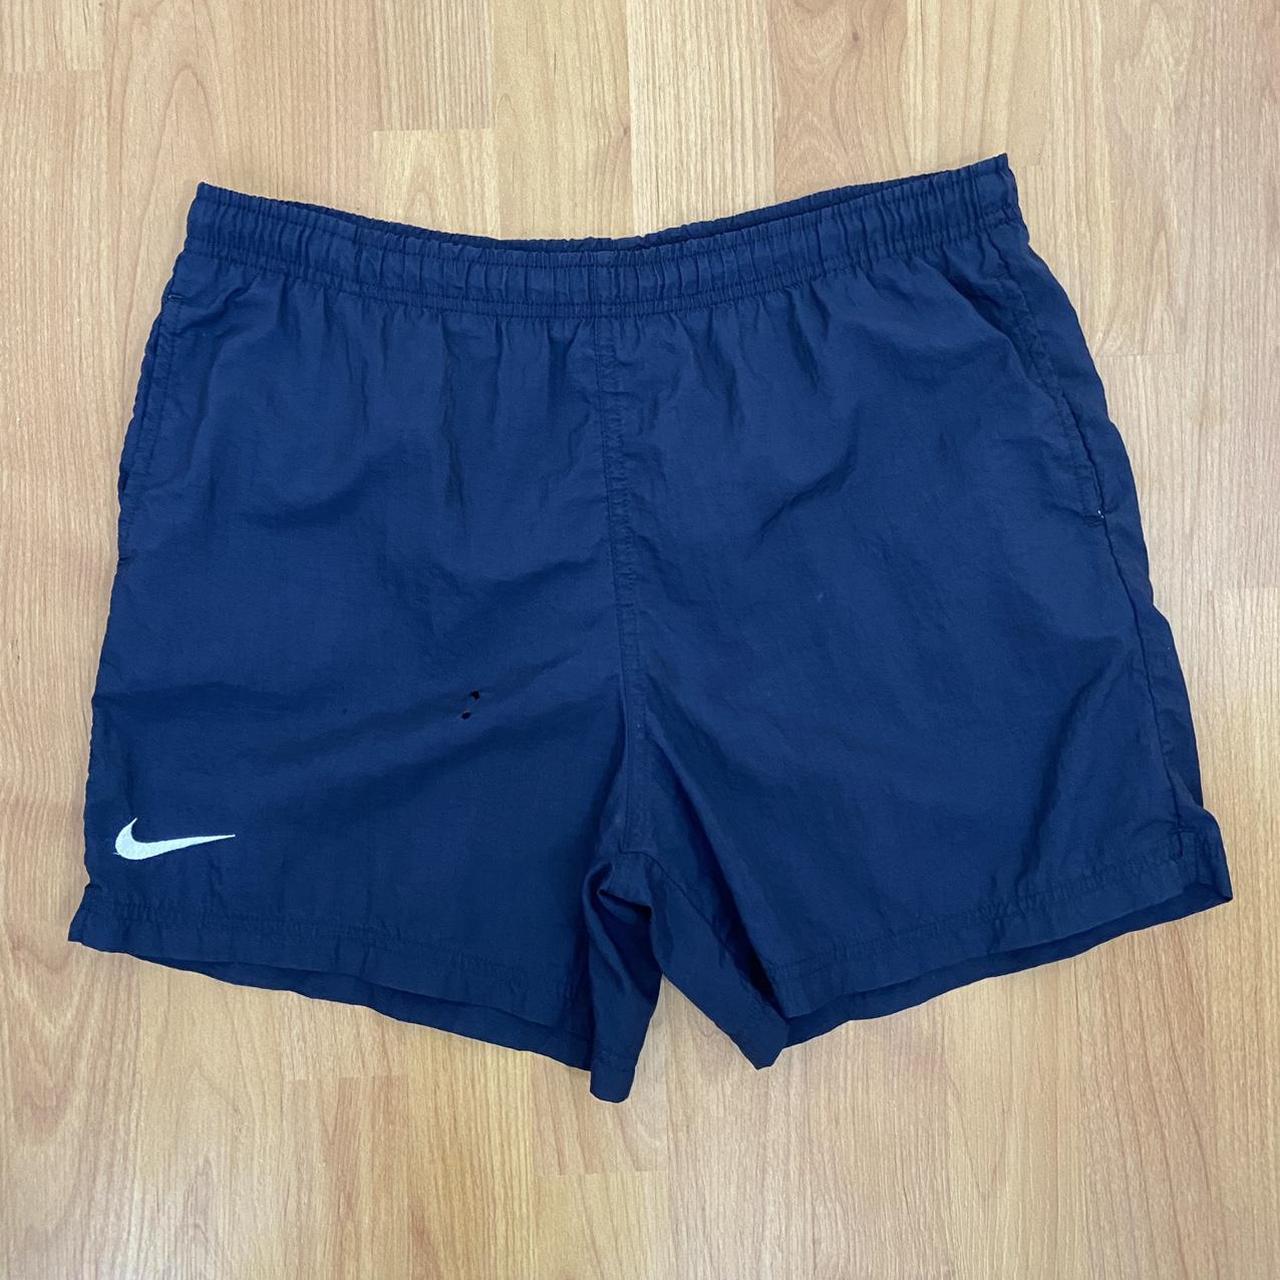 Multi-length Compression Shorts - Navy